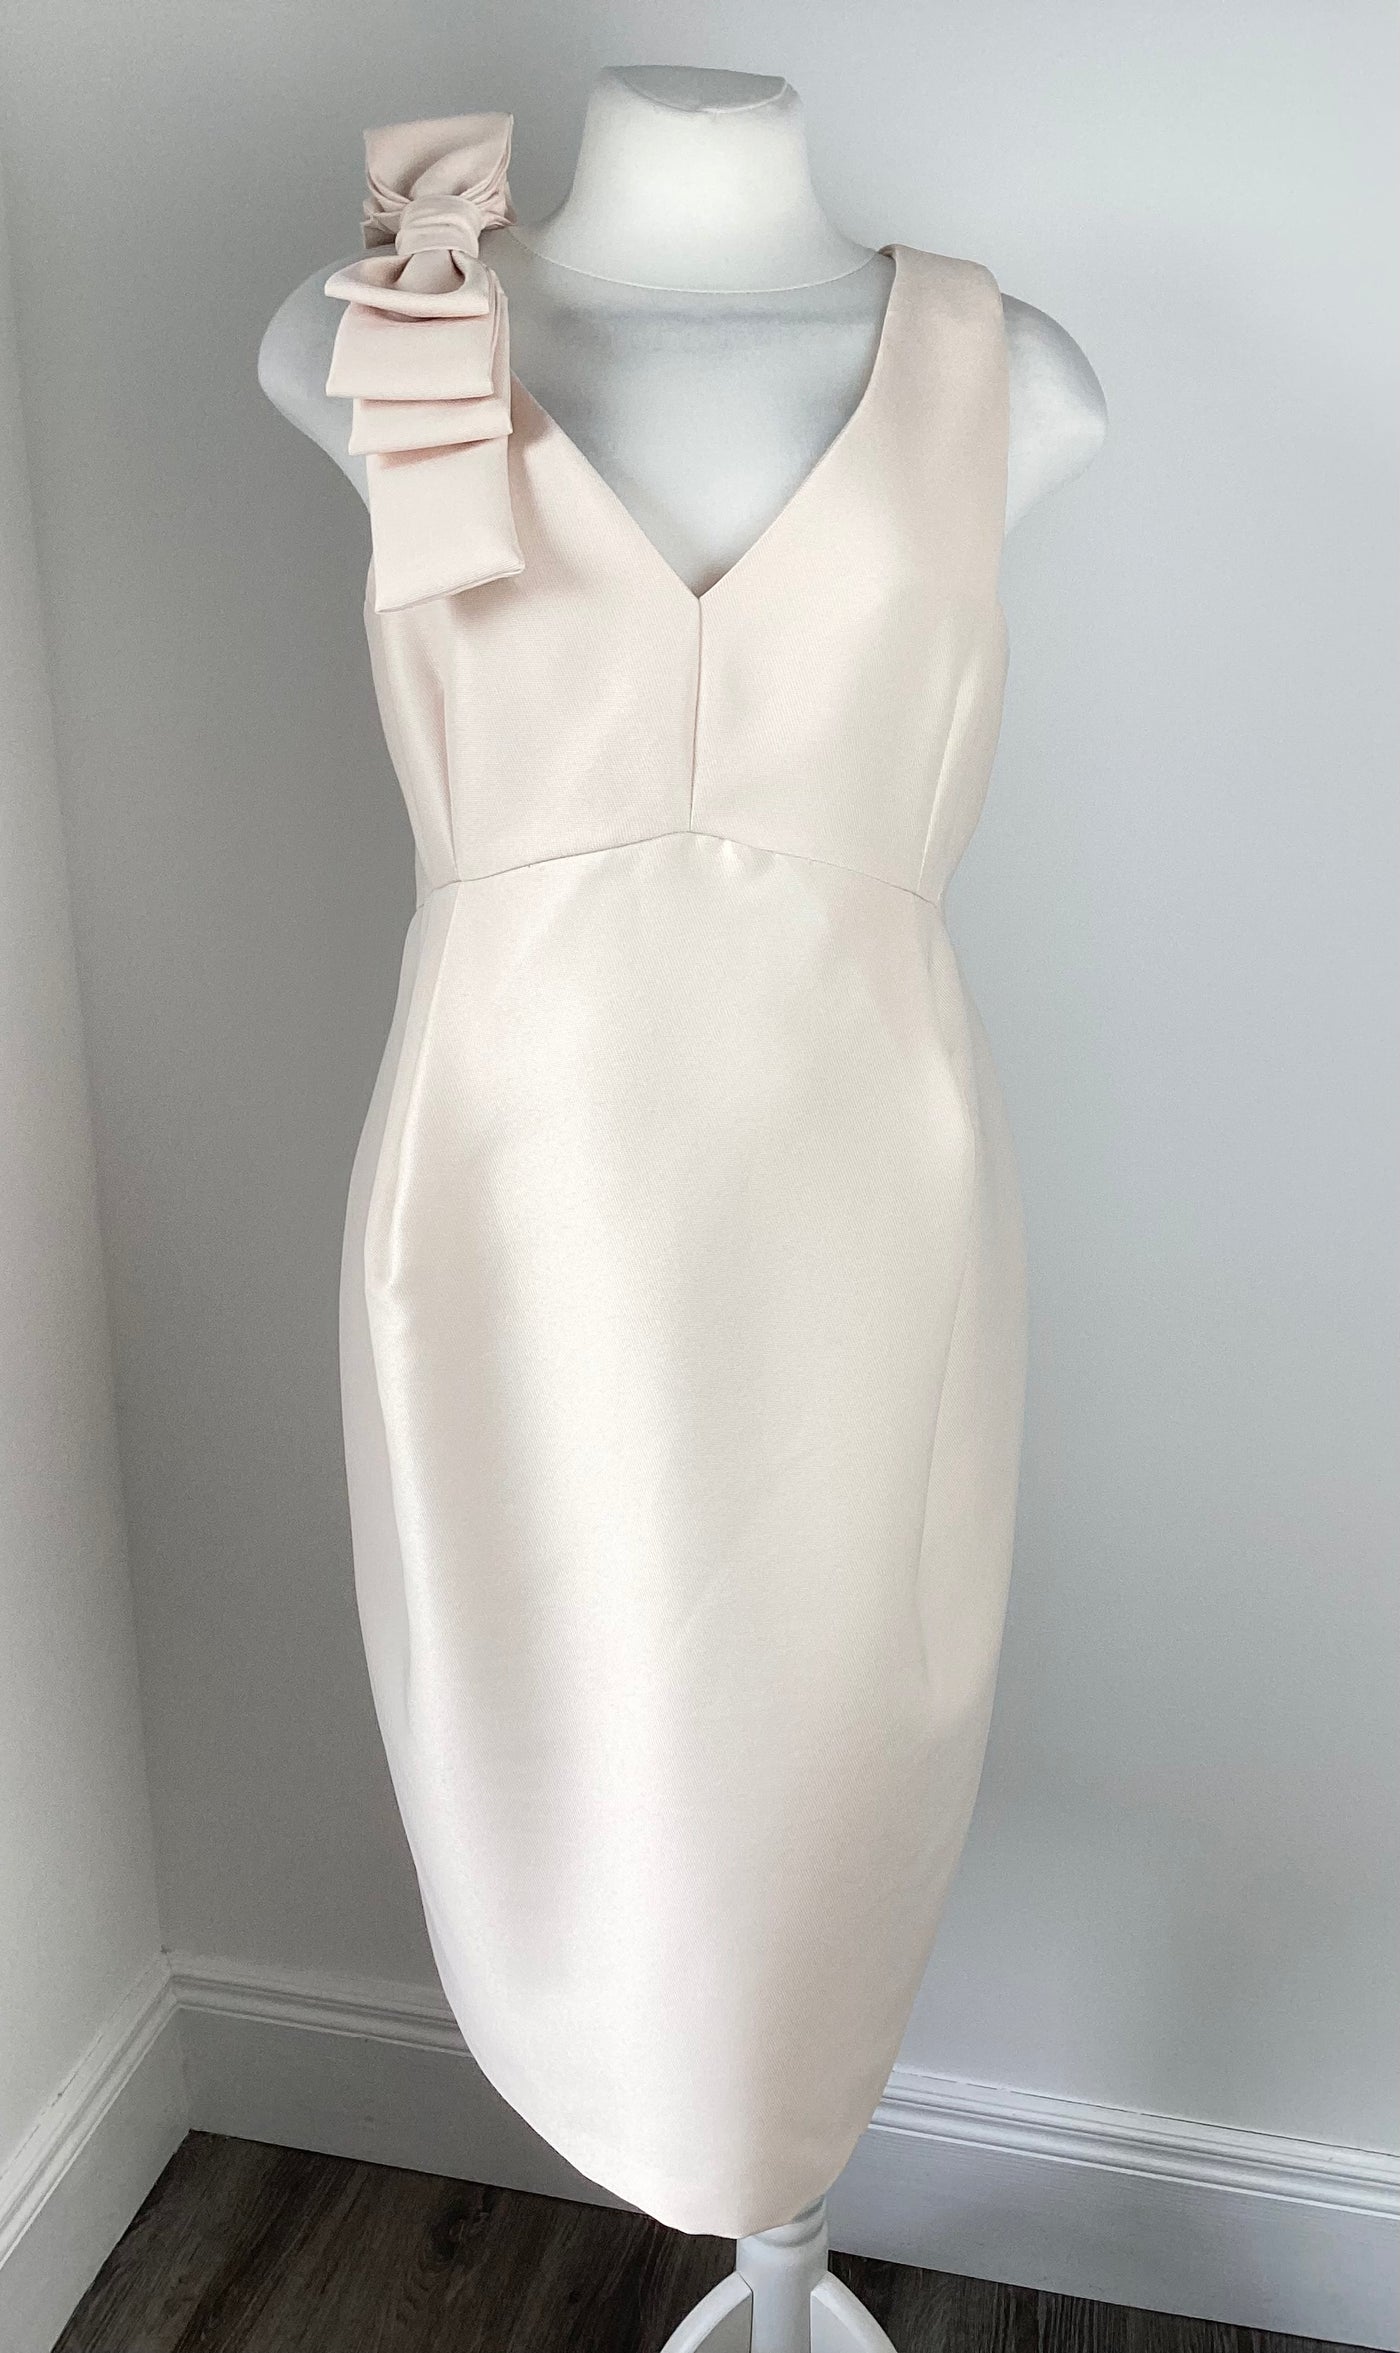 Asos Maternity nude sleeveless dress with bow shoulder detail - Size 18